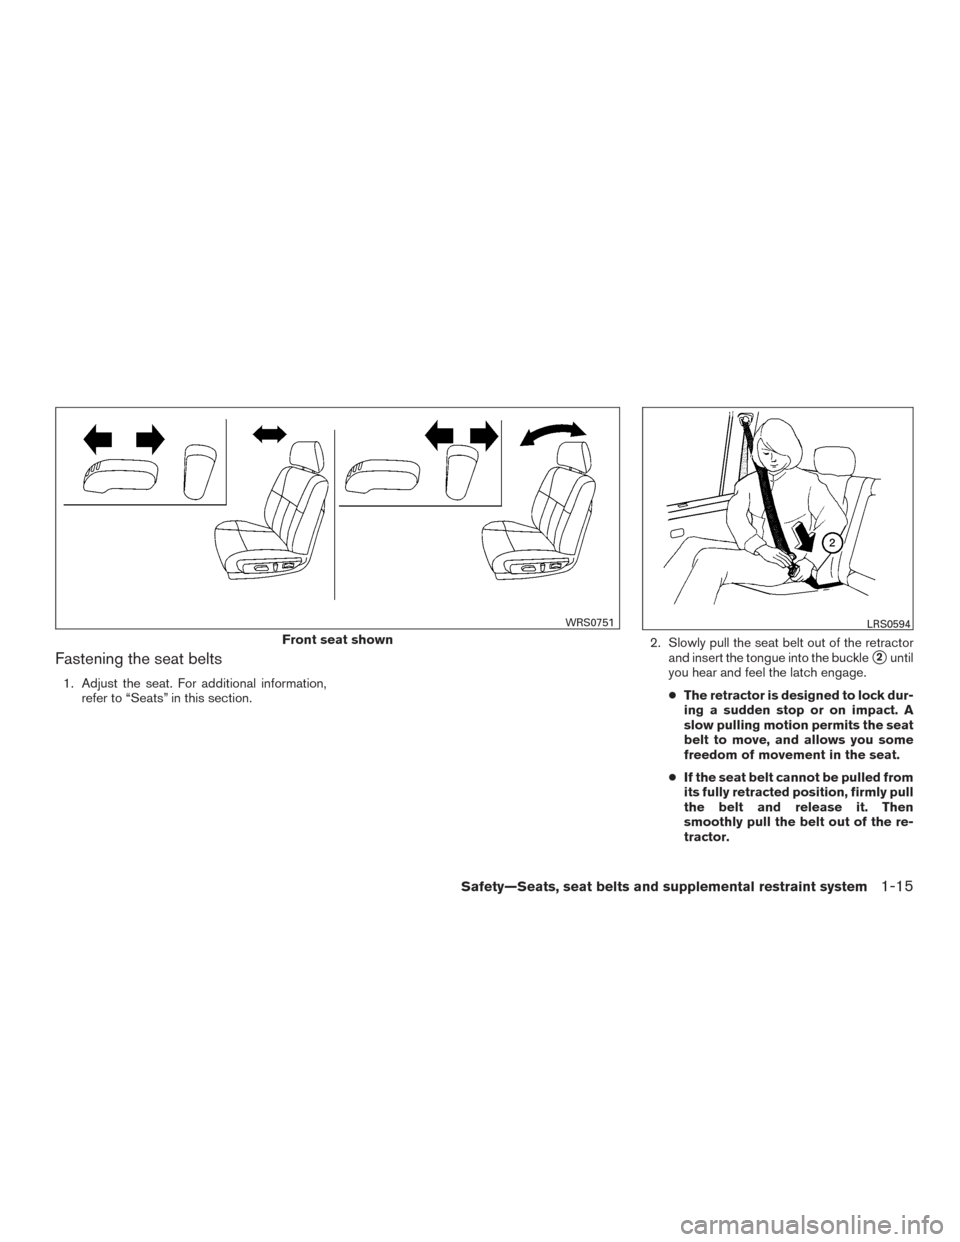 NISSAN ALTIMA 2015 L33 / 5.G Owners Guide Fastening the seat belts
1. Adjust the seat. For additional information,refer to “Seats” in this section. 2. Slowly pull the seat belt out of the retractor
and insert the tongue into the buckle
2